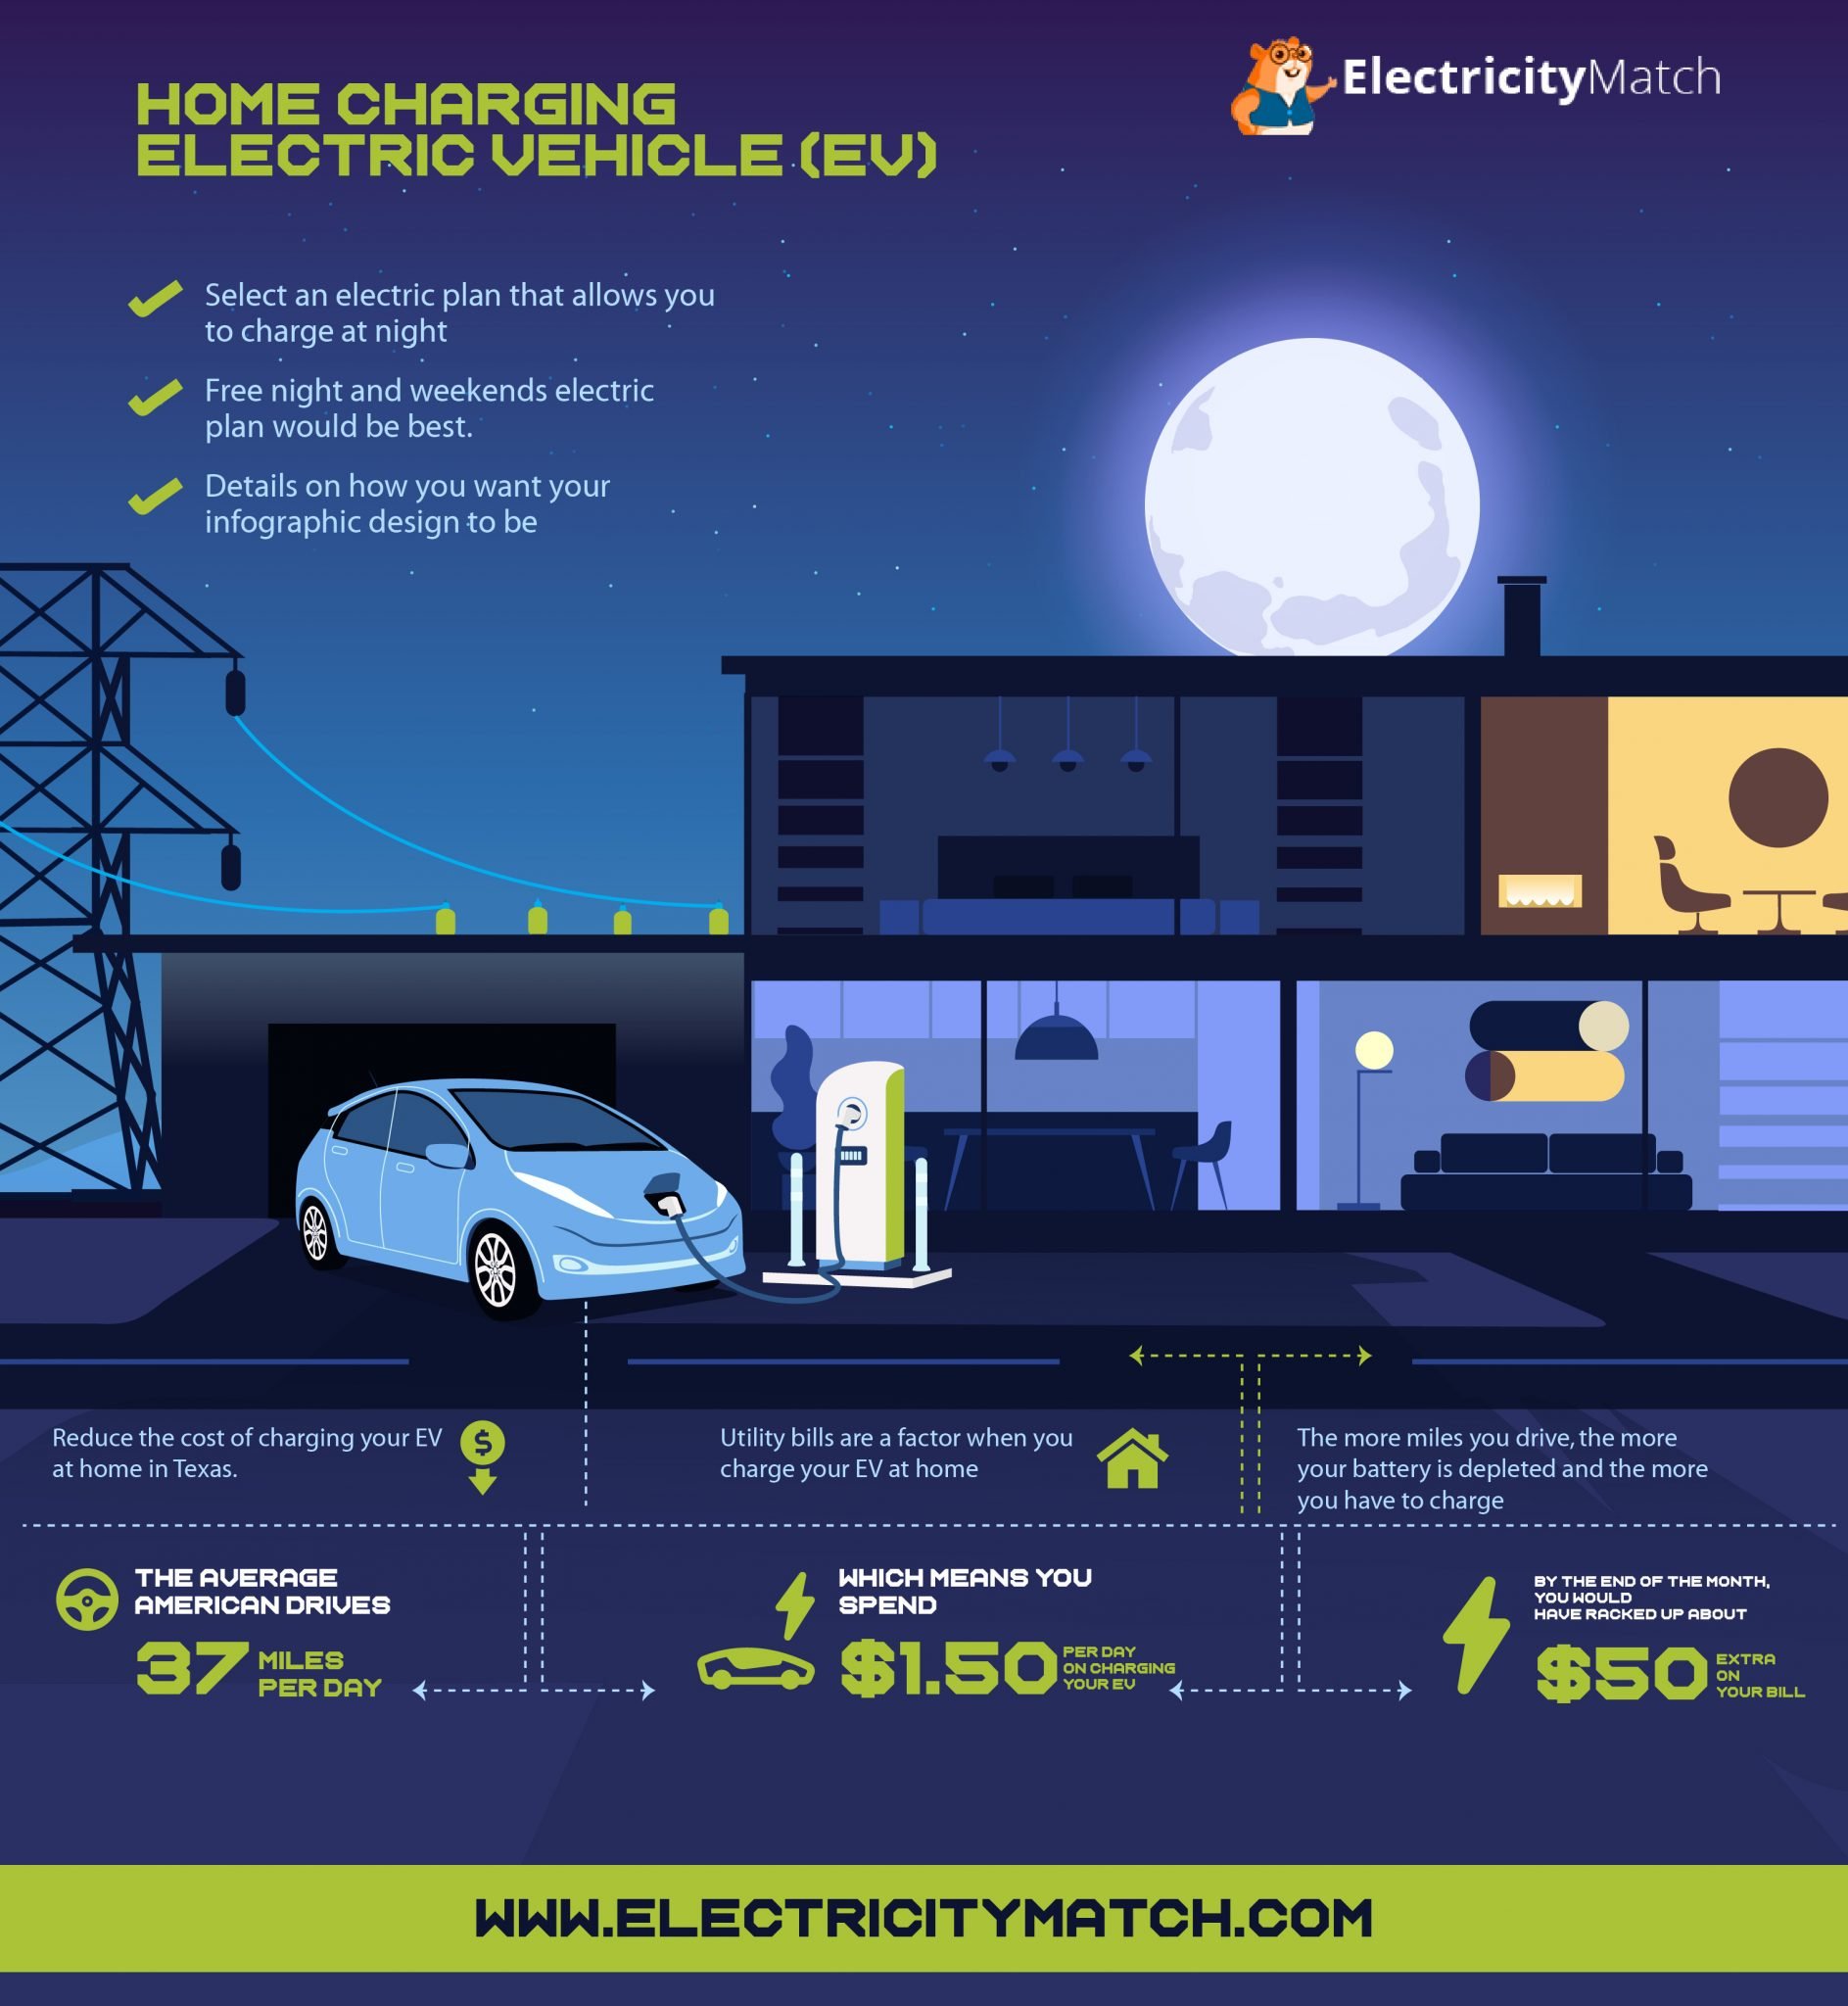 Reduce the cost of charging your Texas Electric Vehicle Electricity Match